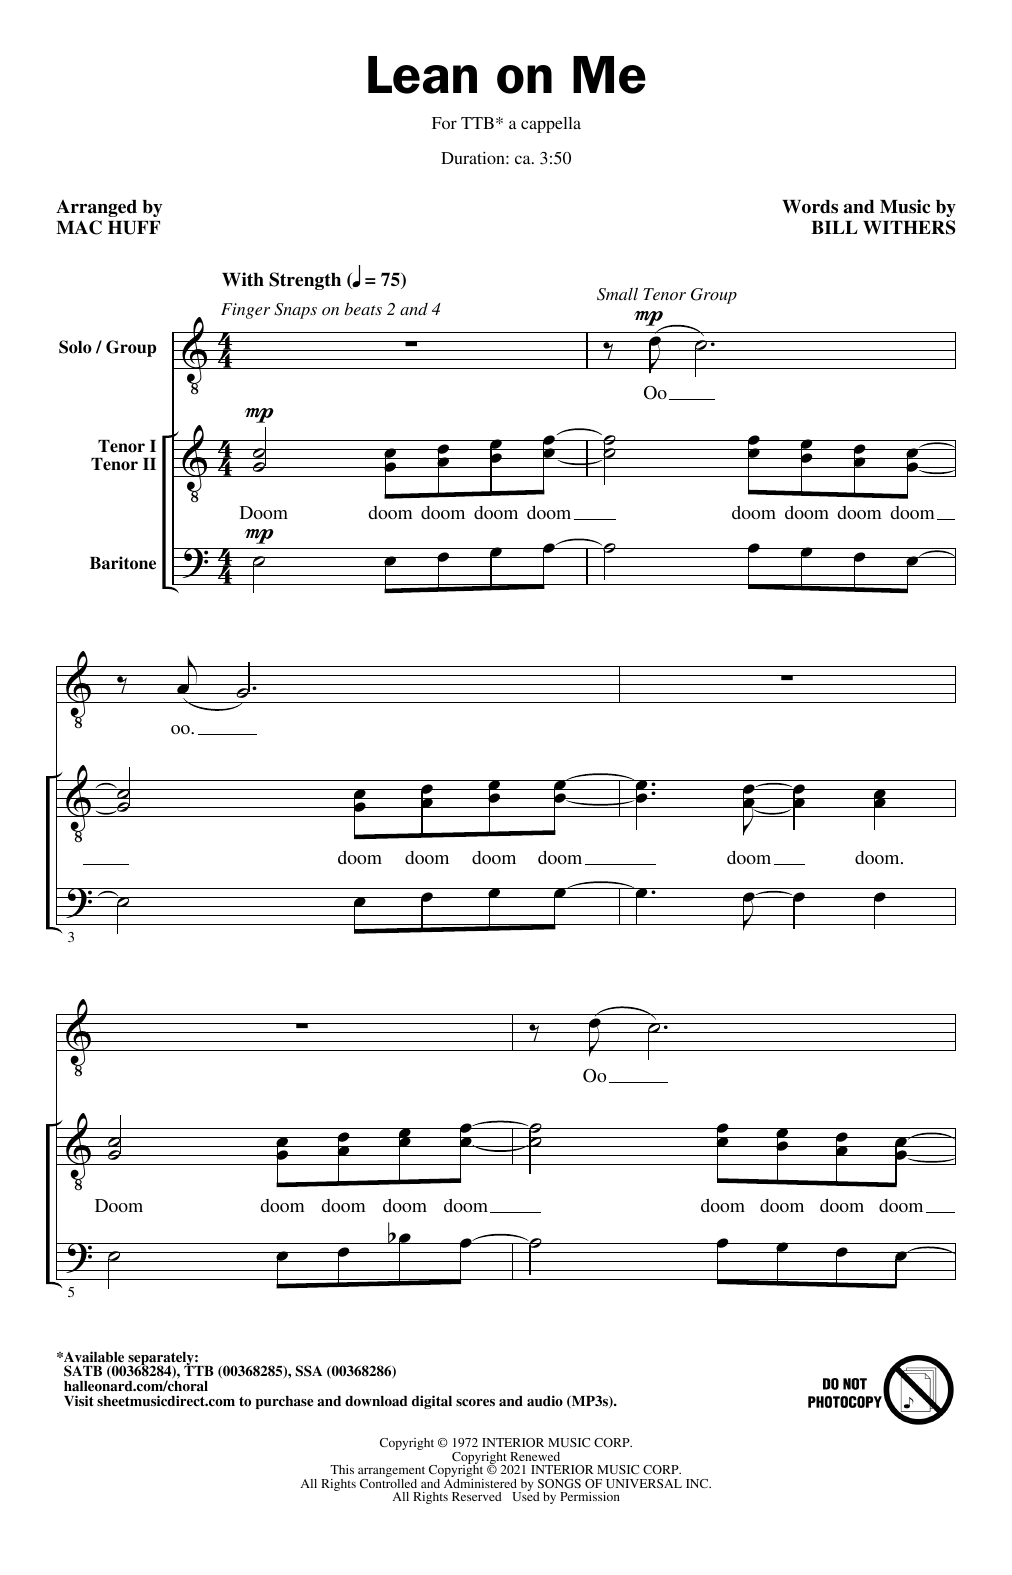 Download Bill Withers Lean On Me (arr. Mac Huff) Sheet Music